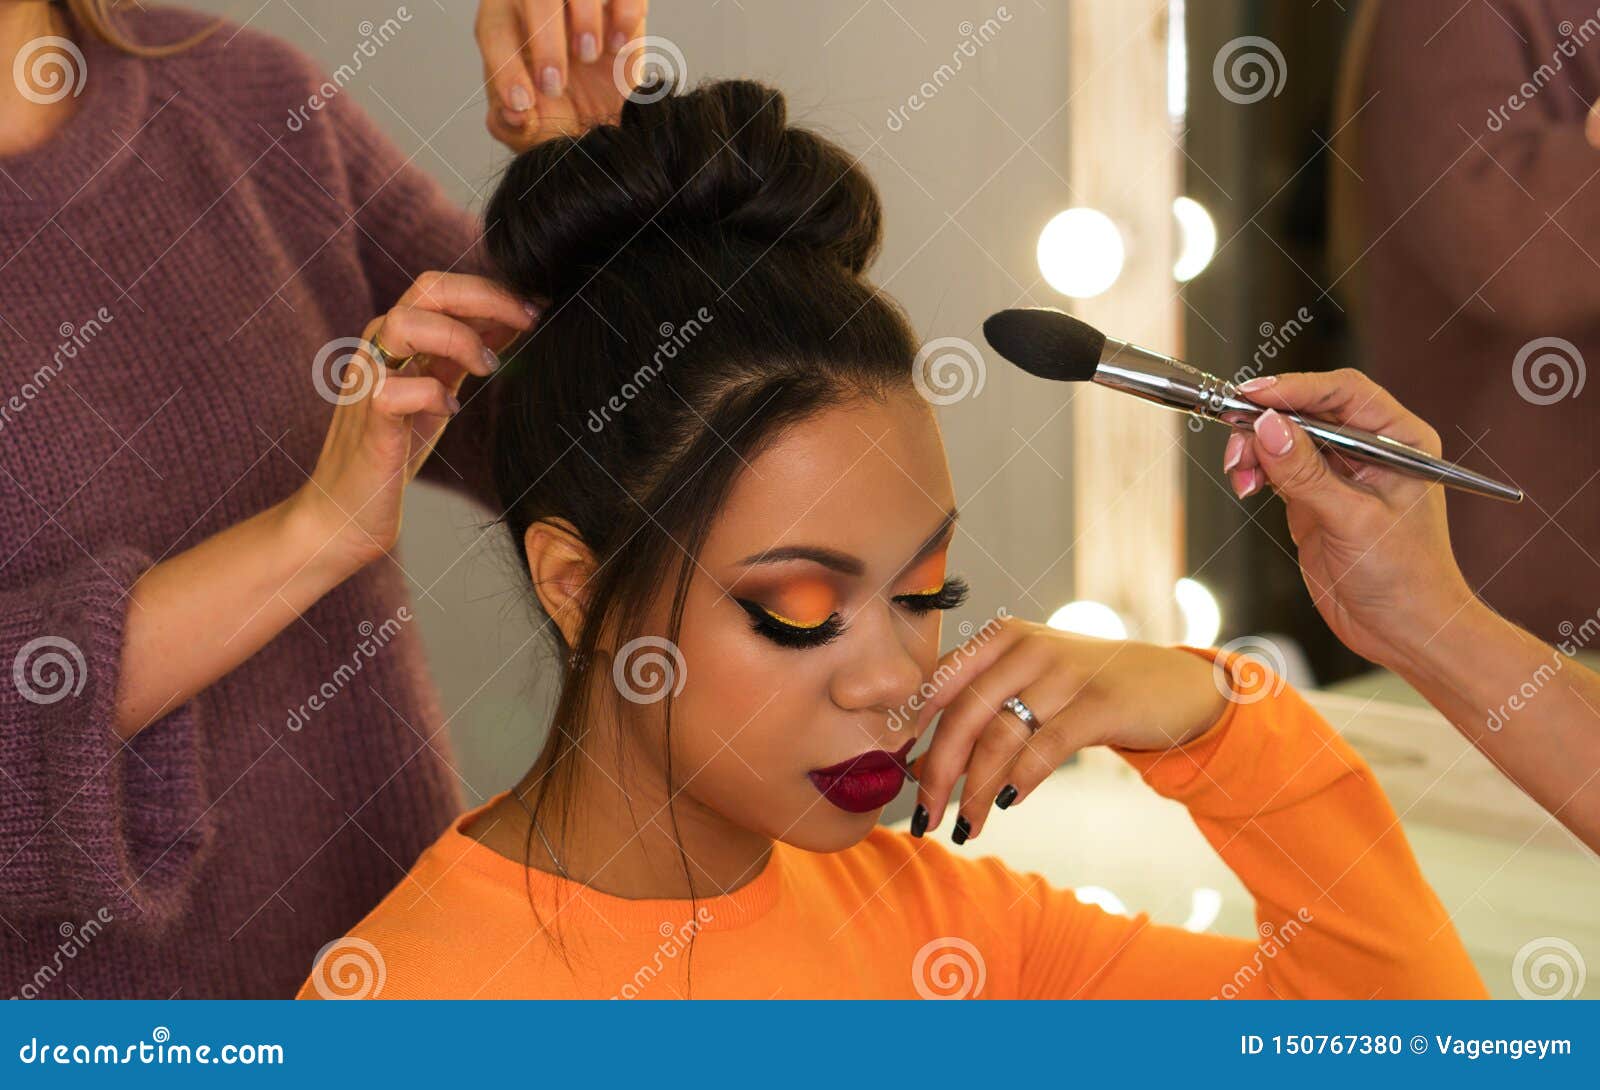 Girl in beauty salon stock photo. Image of african, hairstyle - 150767380